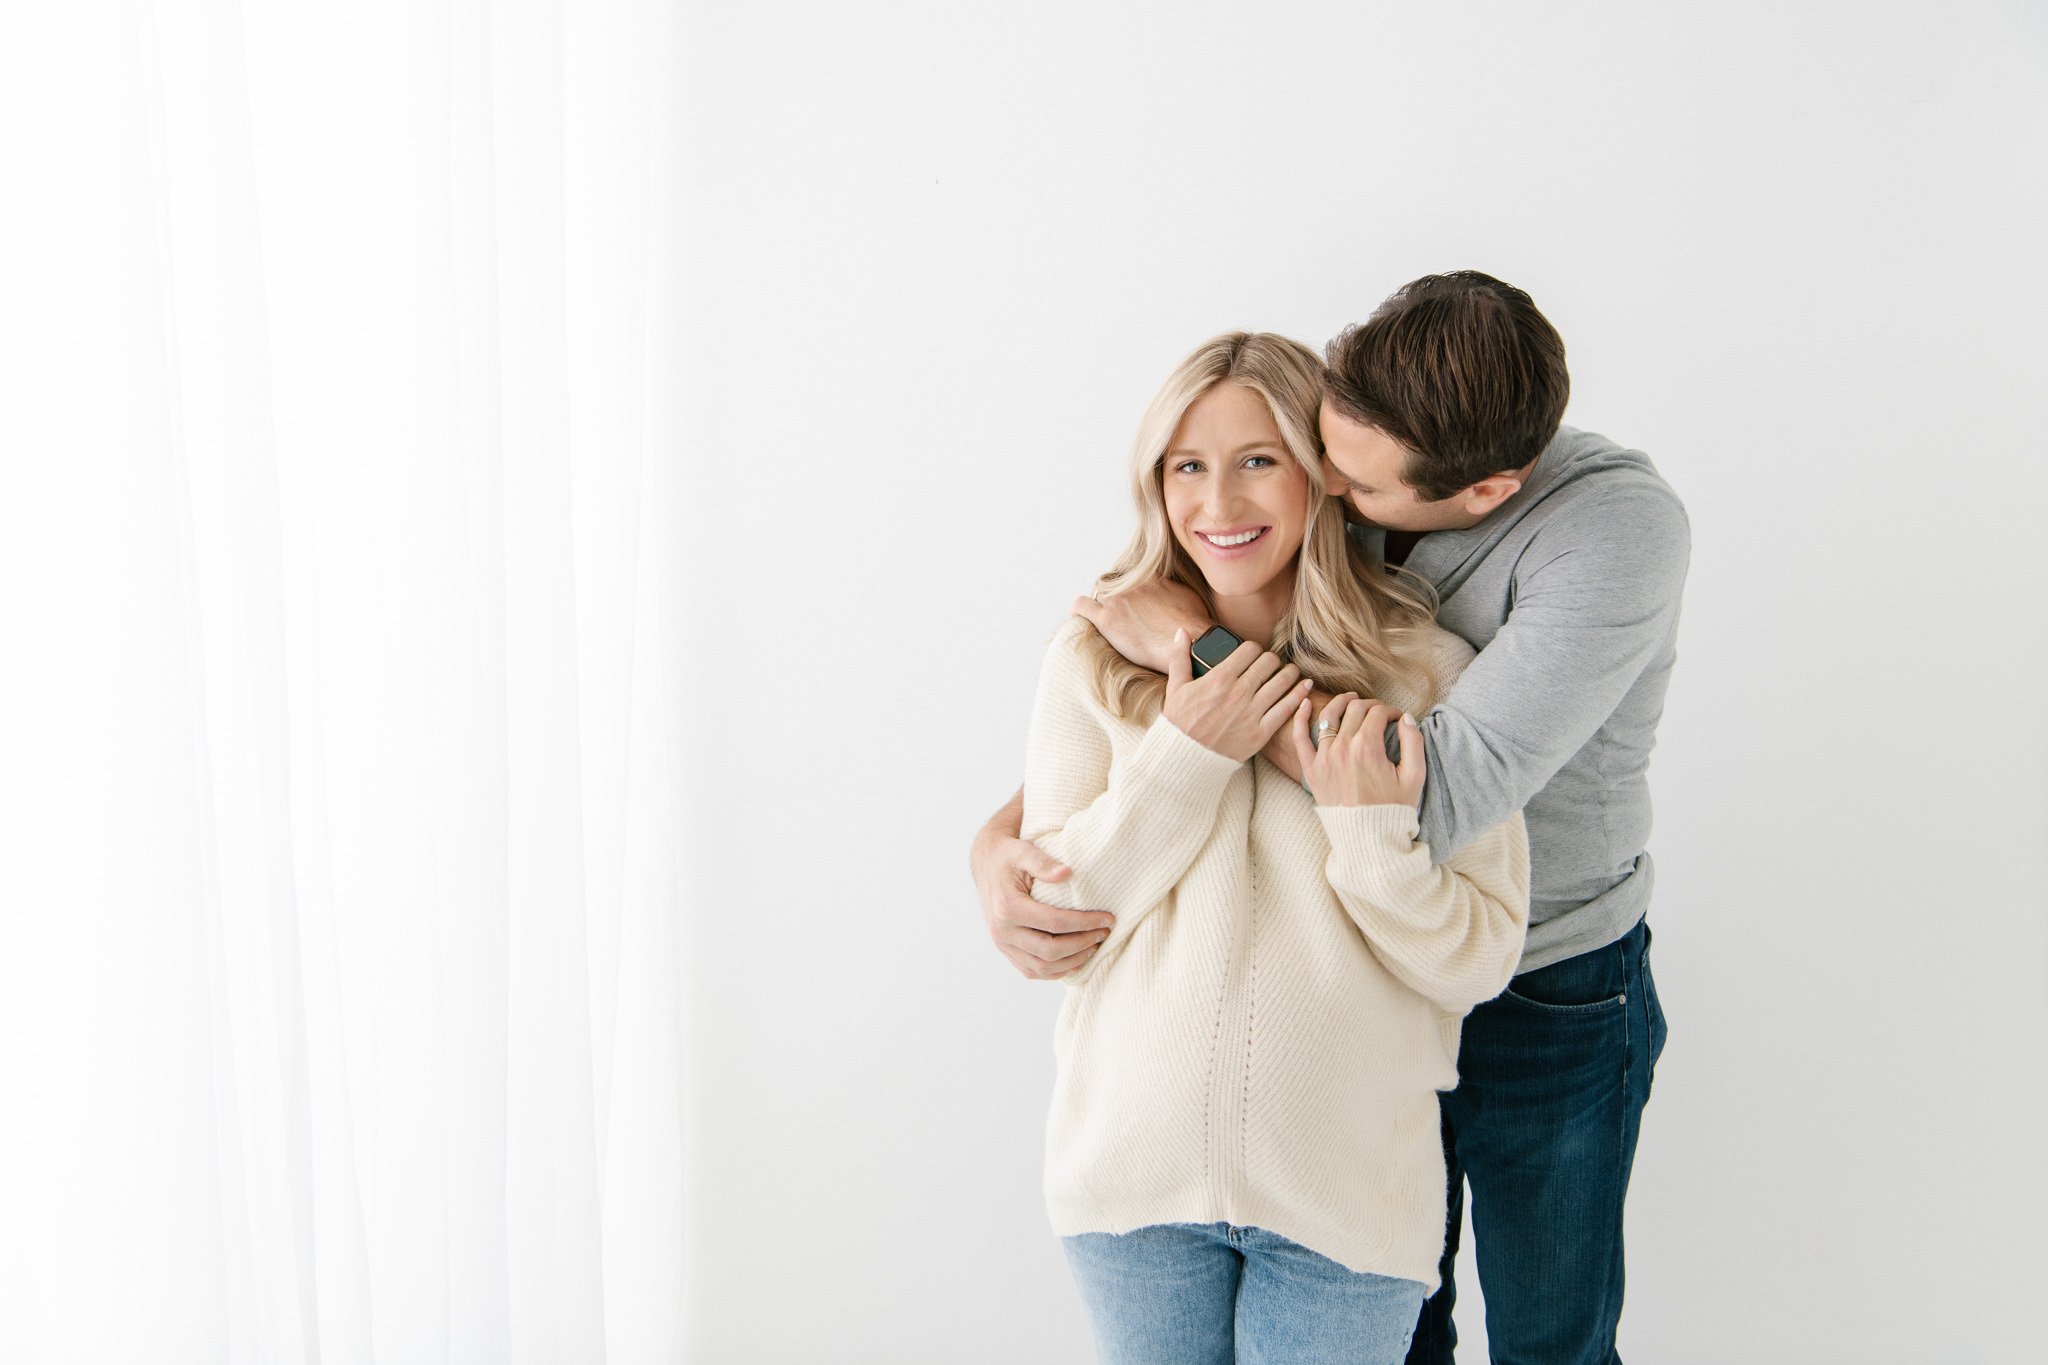  A husband hugs his pregnant wife in a bright studio captured by Nicole Hawkins Photography on the East Coast. growing family #NicoleHawkinsPhotography #NicoleHawkinsMaternity #Studiomaternityportraits #NewJerseymaternity #NewYorkMaternity 